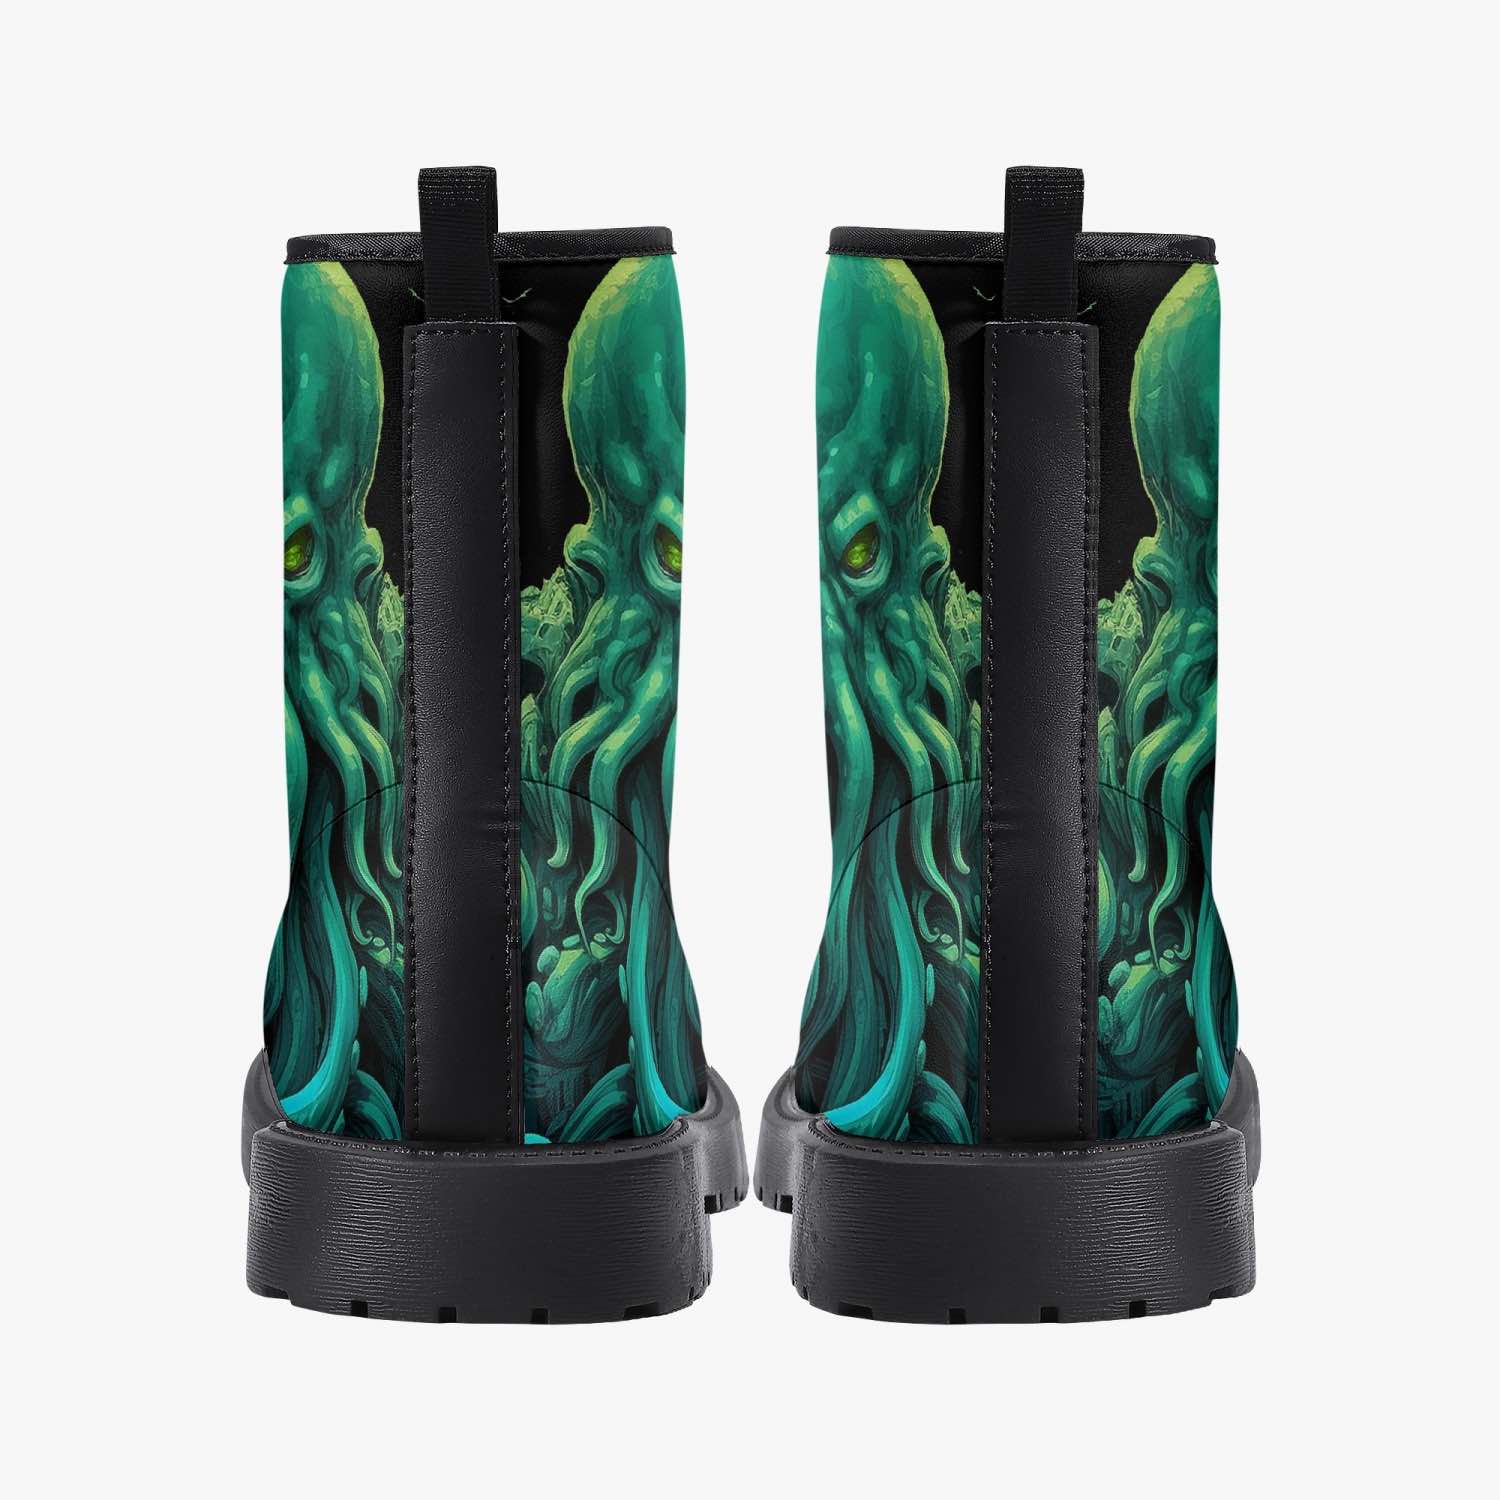 back view of the mighty deep vibrant green and black Cthulhu sea monster on vegan leather boots at Gallery Serpentine